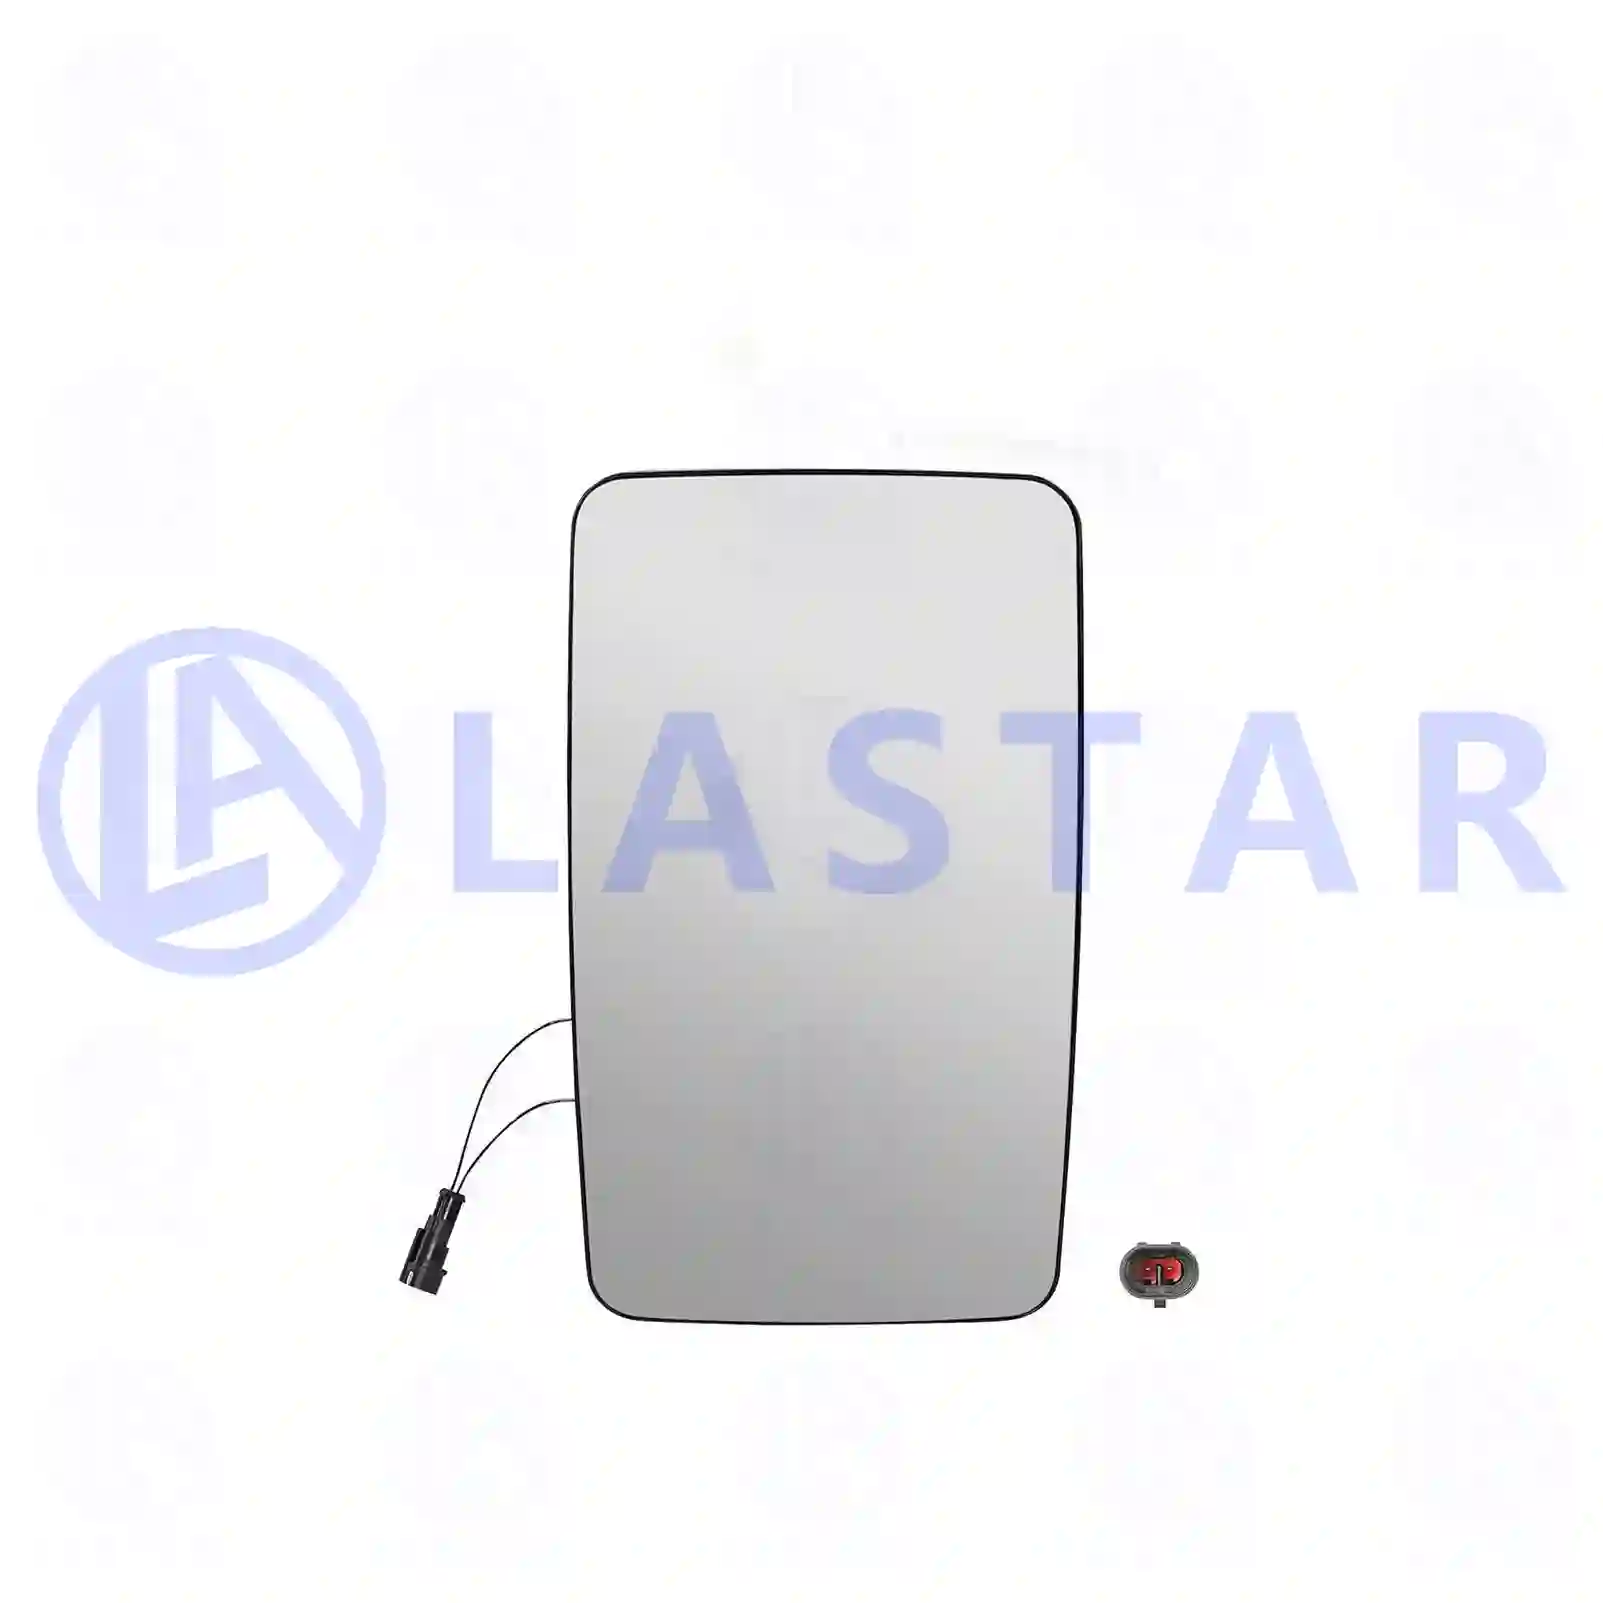 Mirror glass, main mirror, heated, 77720460, 02997153, 2997153, 93193197 ||  77720460 Lastar Spare Part | Truck Spare Parts, Auotomotive Spare Parts Mirror glass, main mirror, heated, 77720460, 02997153, 2997153, 93193197 ||  77720460 Lastar Spare Part | Truck Spare Parts, Auotomotive Spare Parts